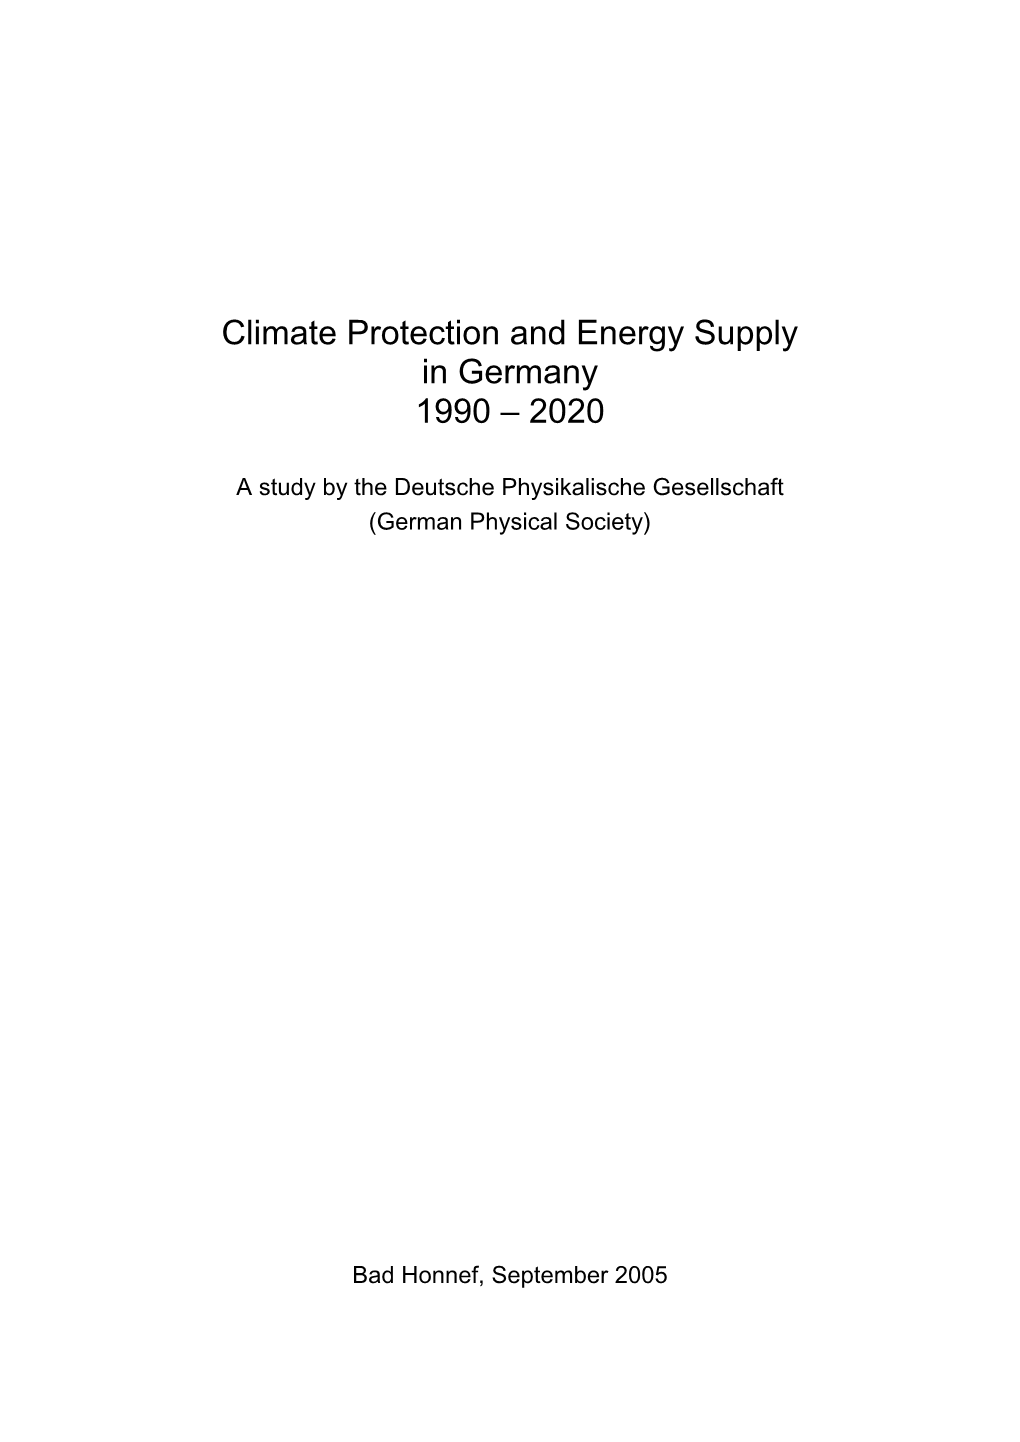 Climate Protection and Energy Supply in Germany 1990 – 2020